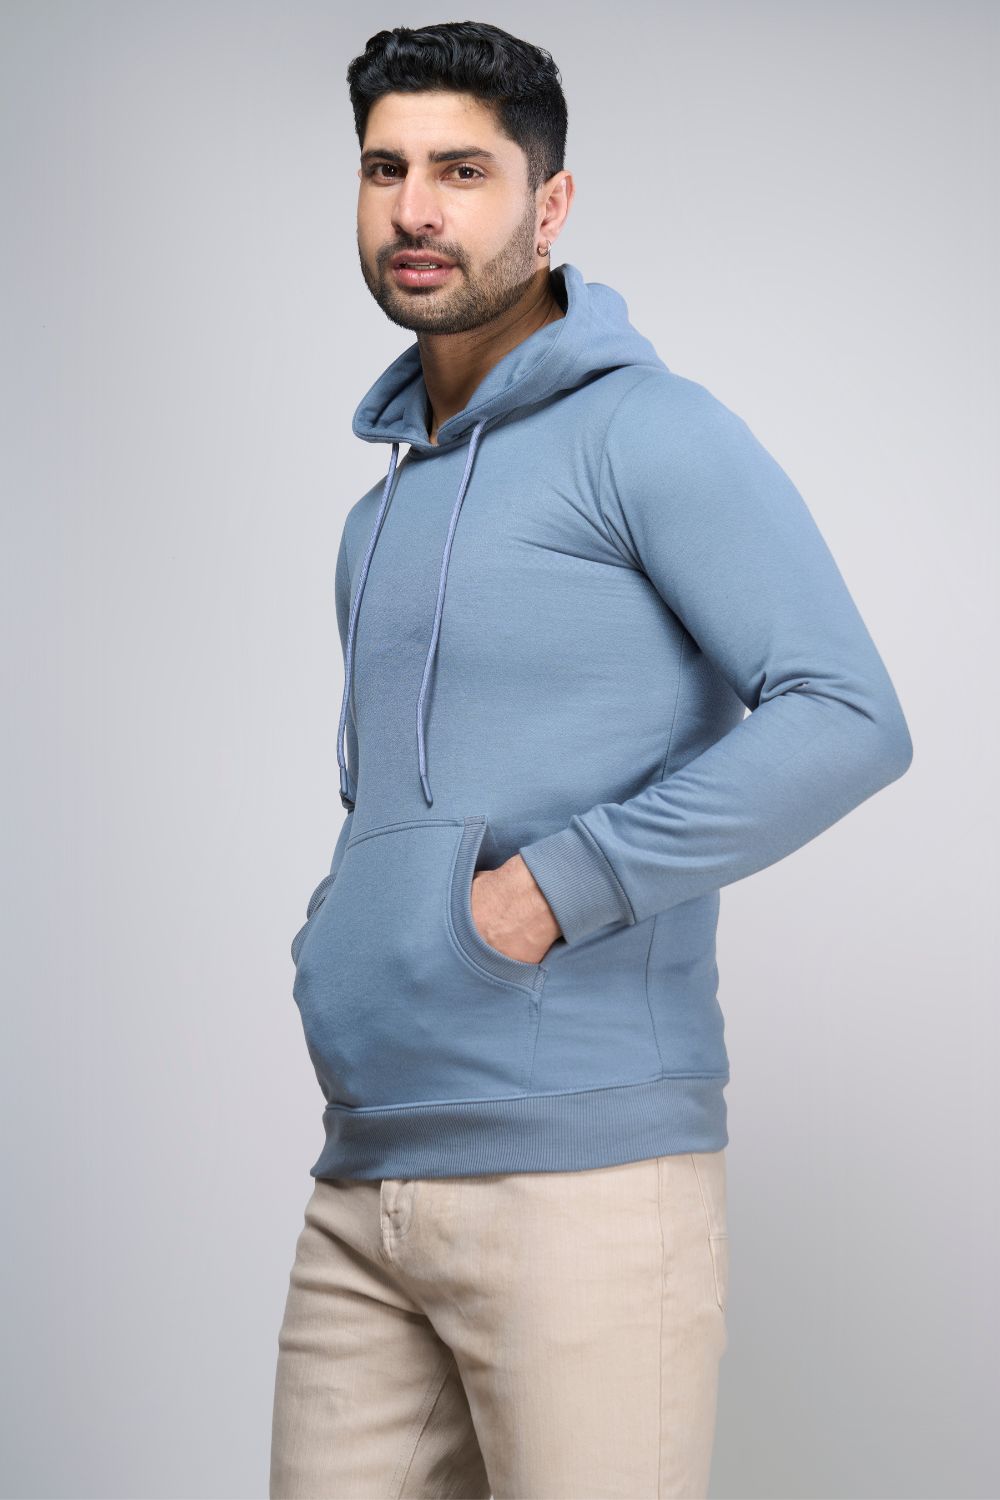 Niagara colored, hoodie for men with full sleeves and relaxed fit, pocket view.